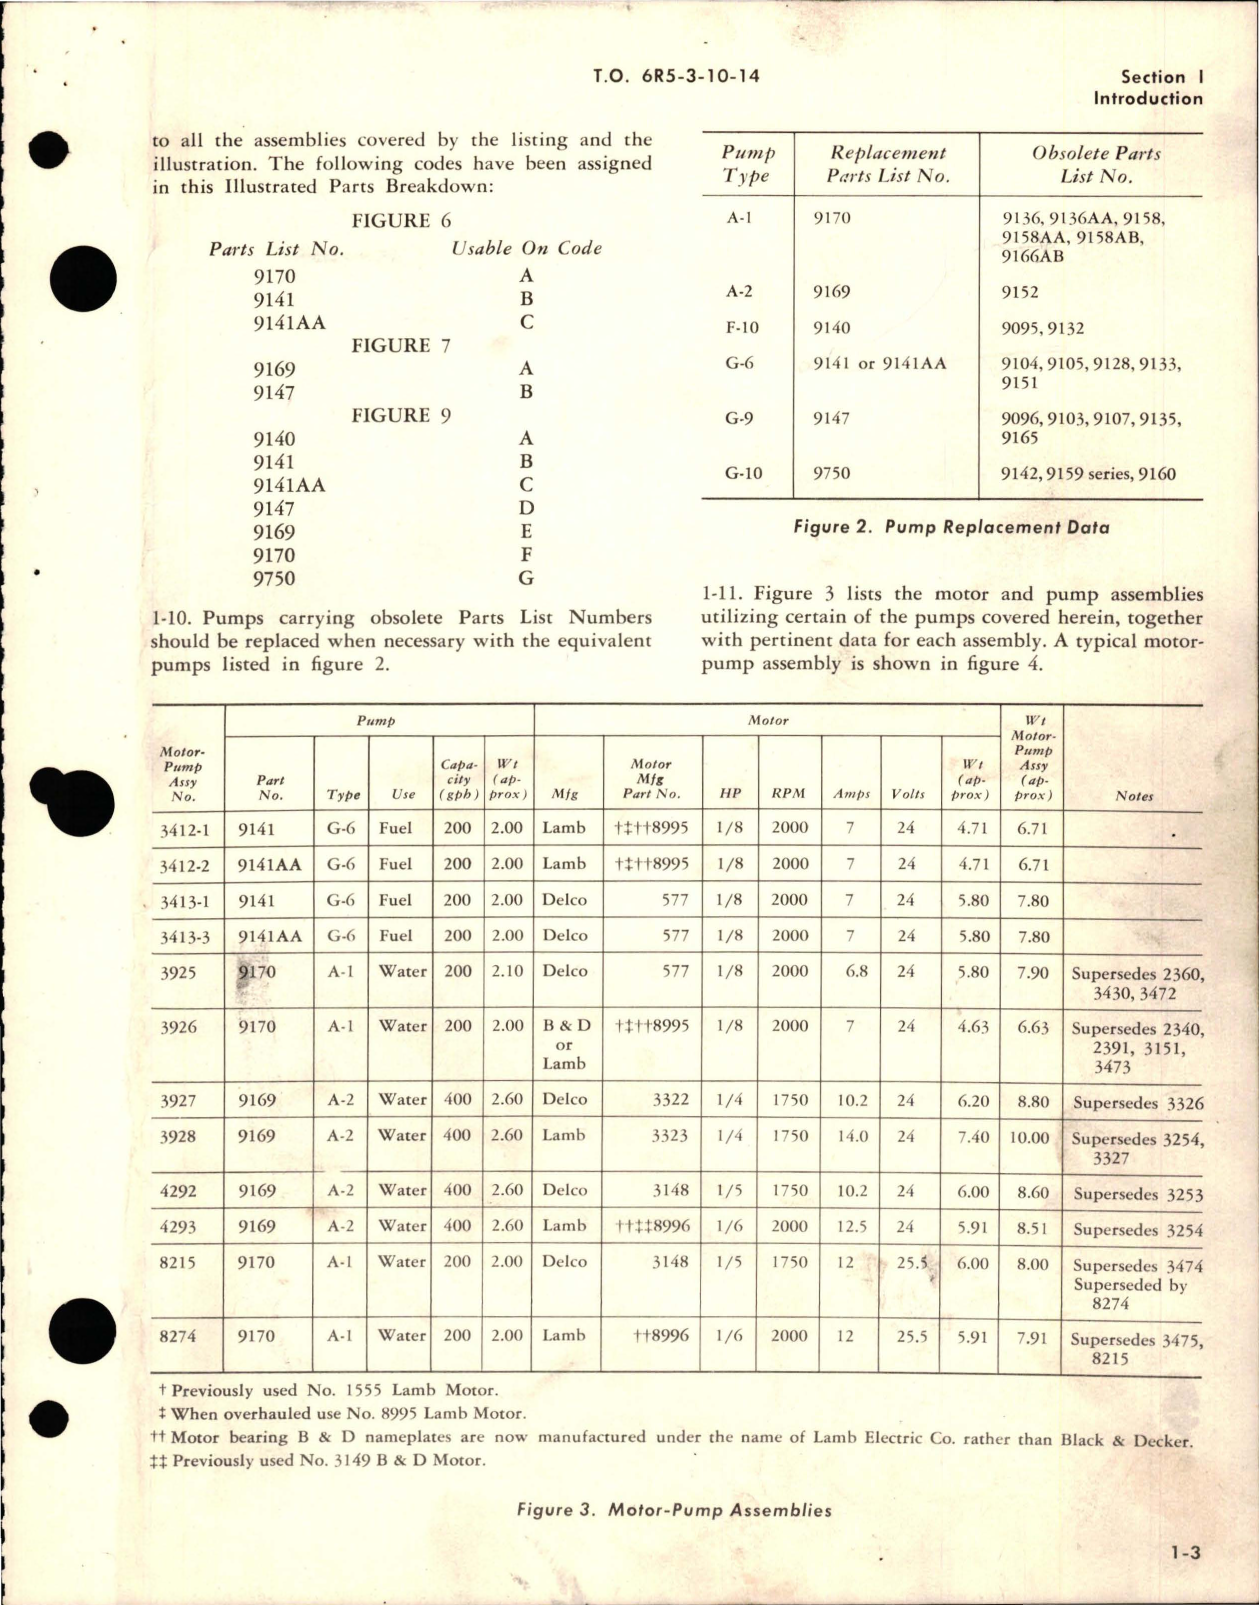 Sample page 5 from AirCorps Library document: Illustrated Parts Breakdown for Fuel and Water Pumps - Types A-1, A-2, F-10, G-6, and G-10 